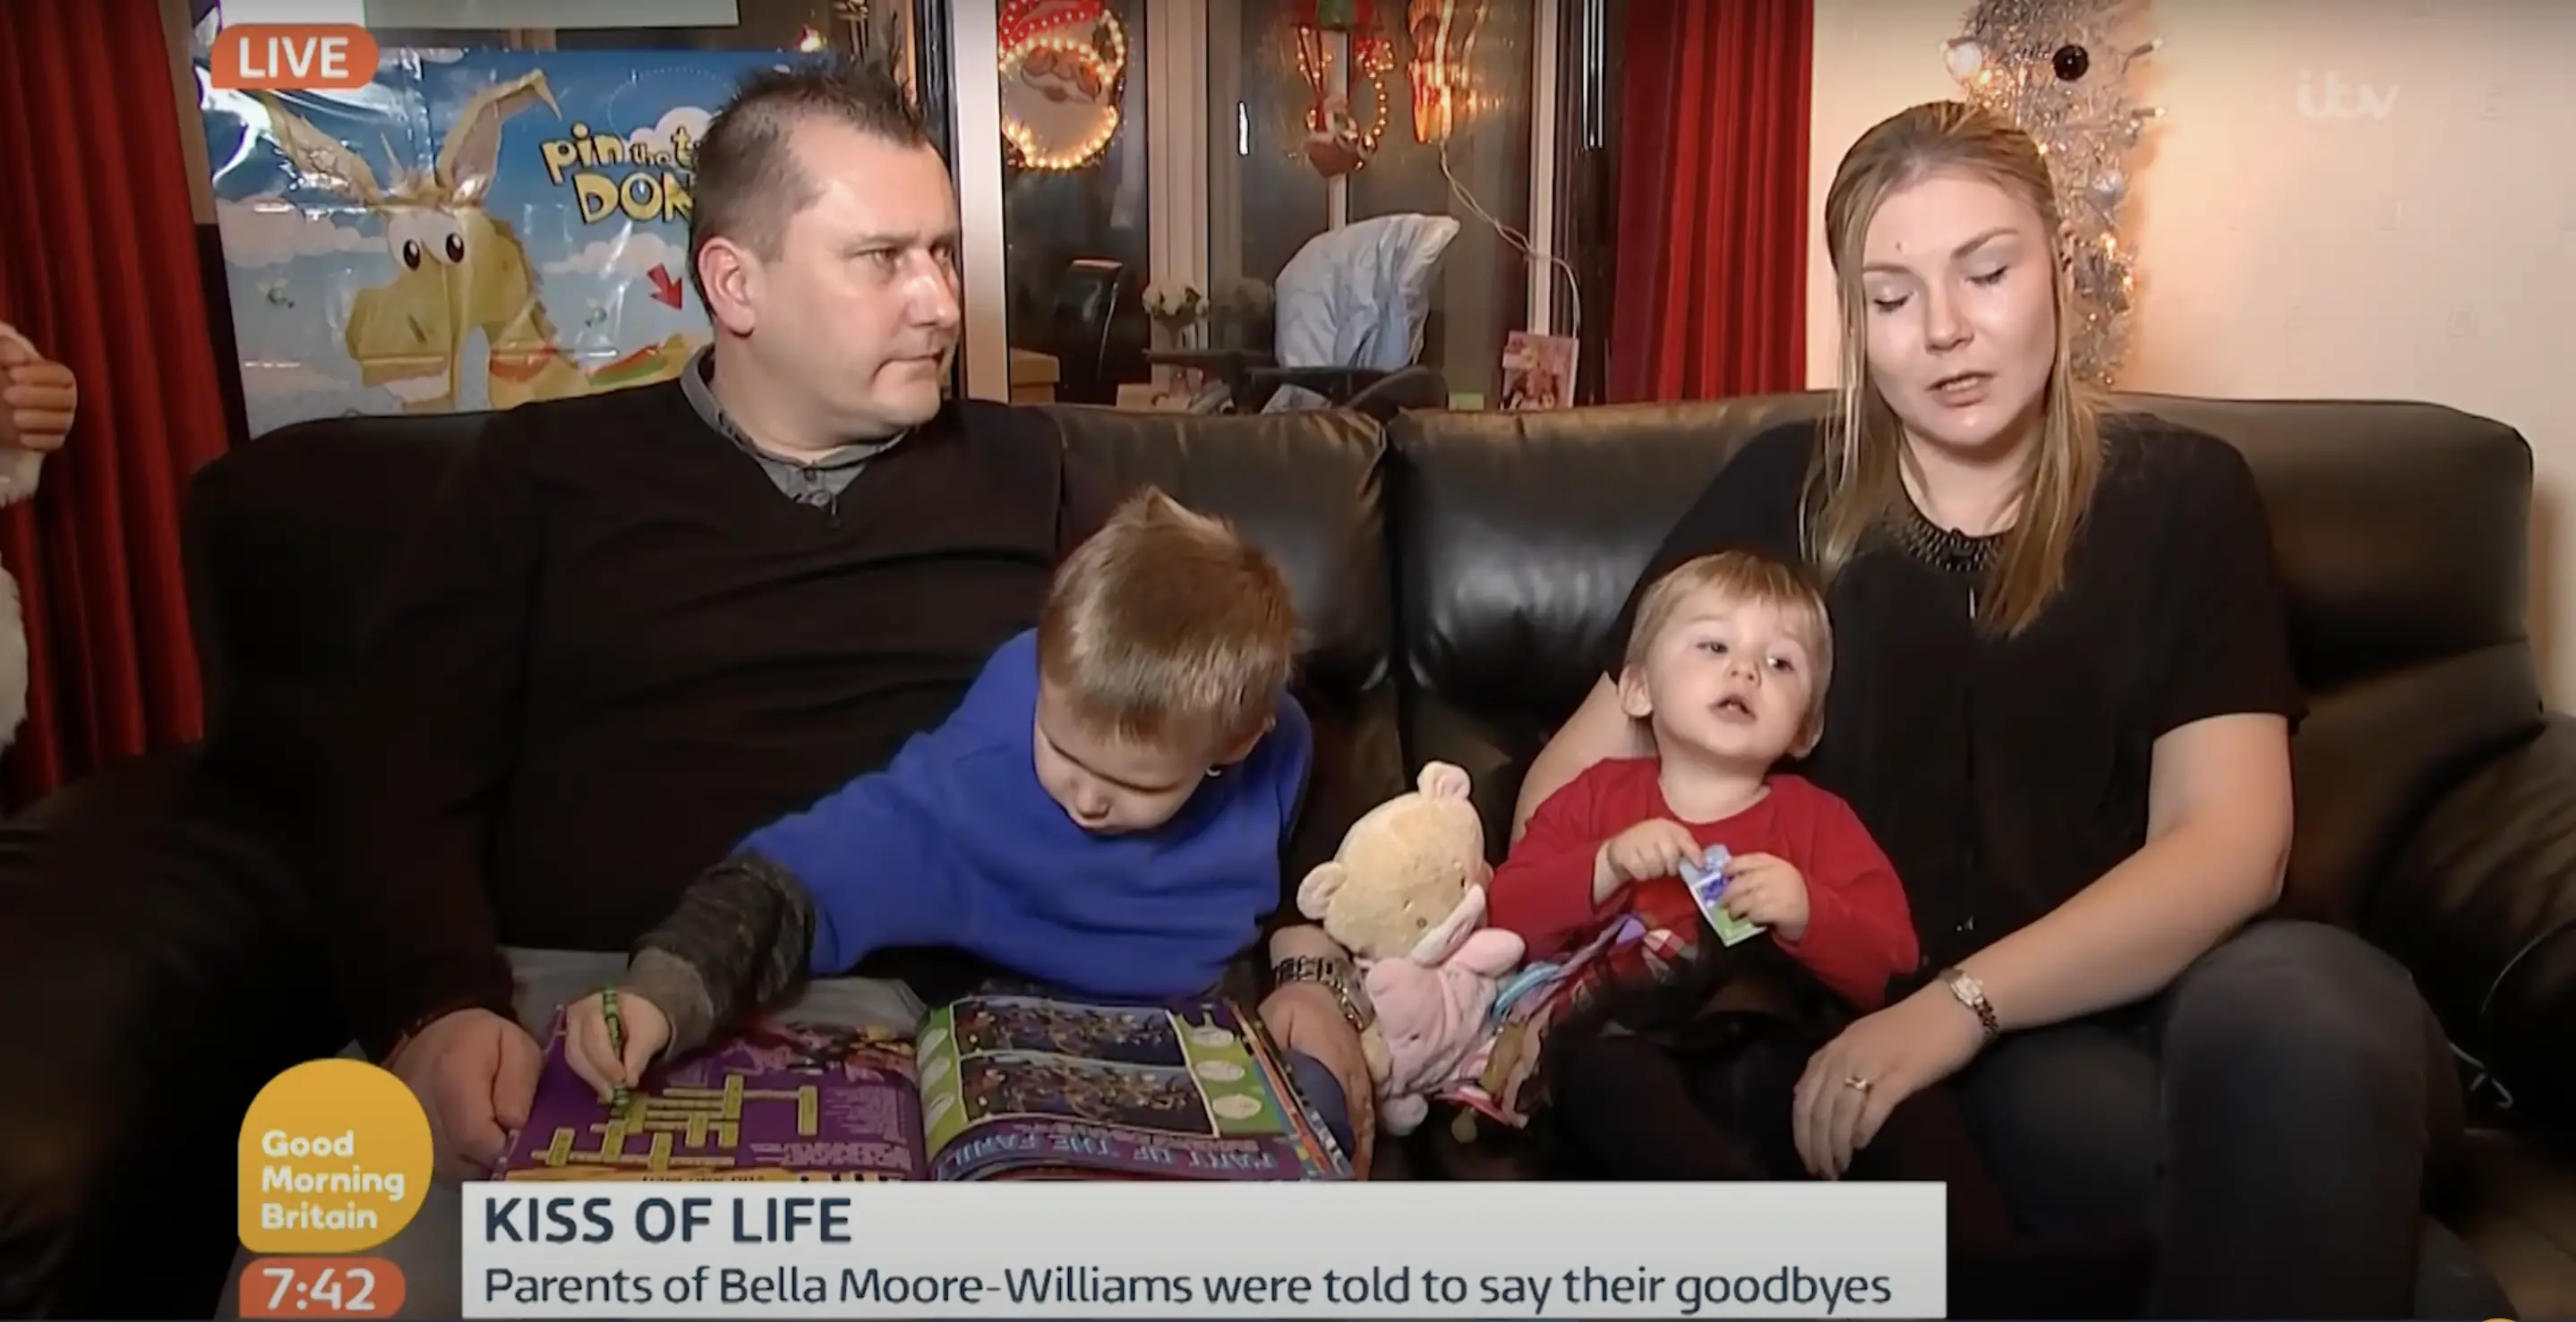 Lee, Bobby, Bella, and Francesca Moore-Williams in an interview from Essex on December 29, 2015 | Source: YouTube/Good Morning Britain